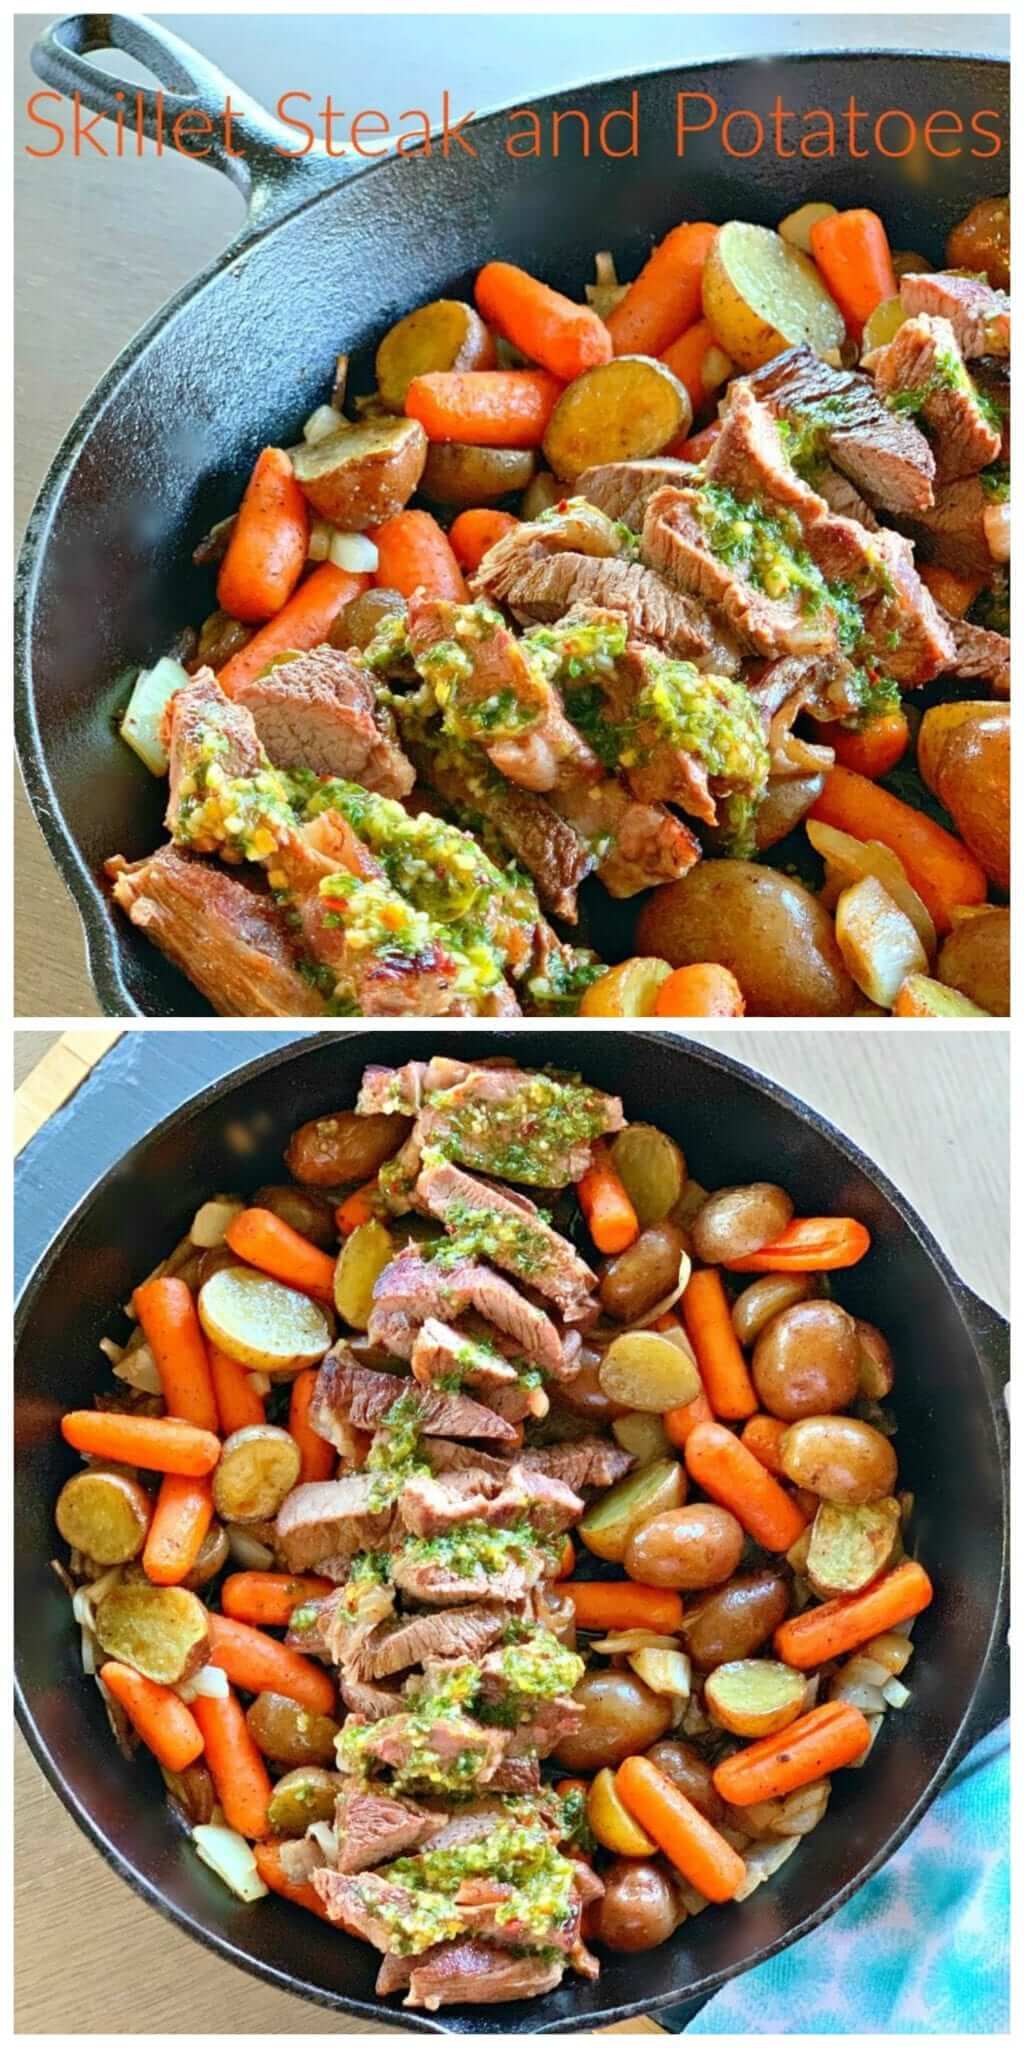 skillet steak with potatoes and carrots